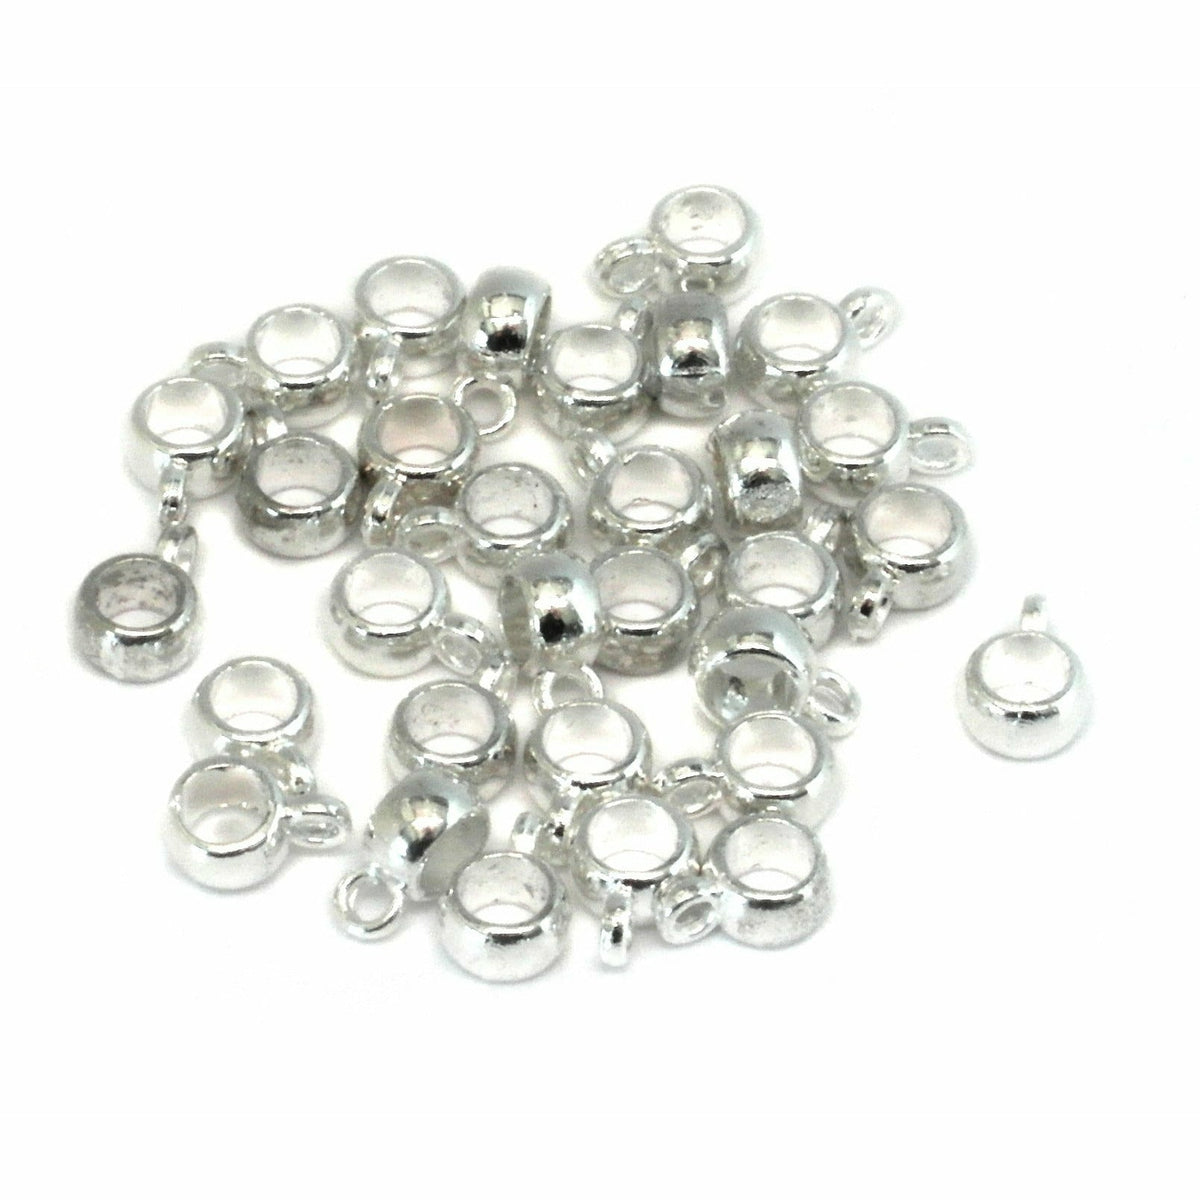 100 pcs Clasp Bail Beads Charms Bail Tube Beads Loose Spacer Bead